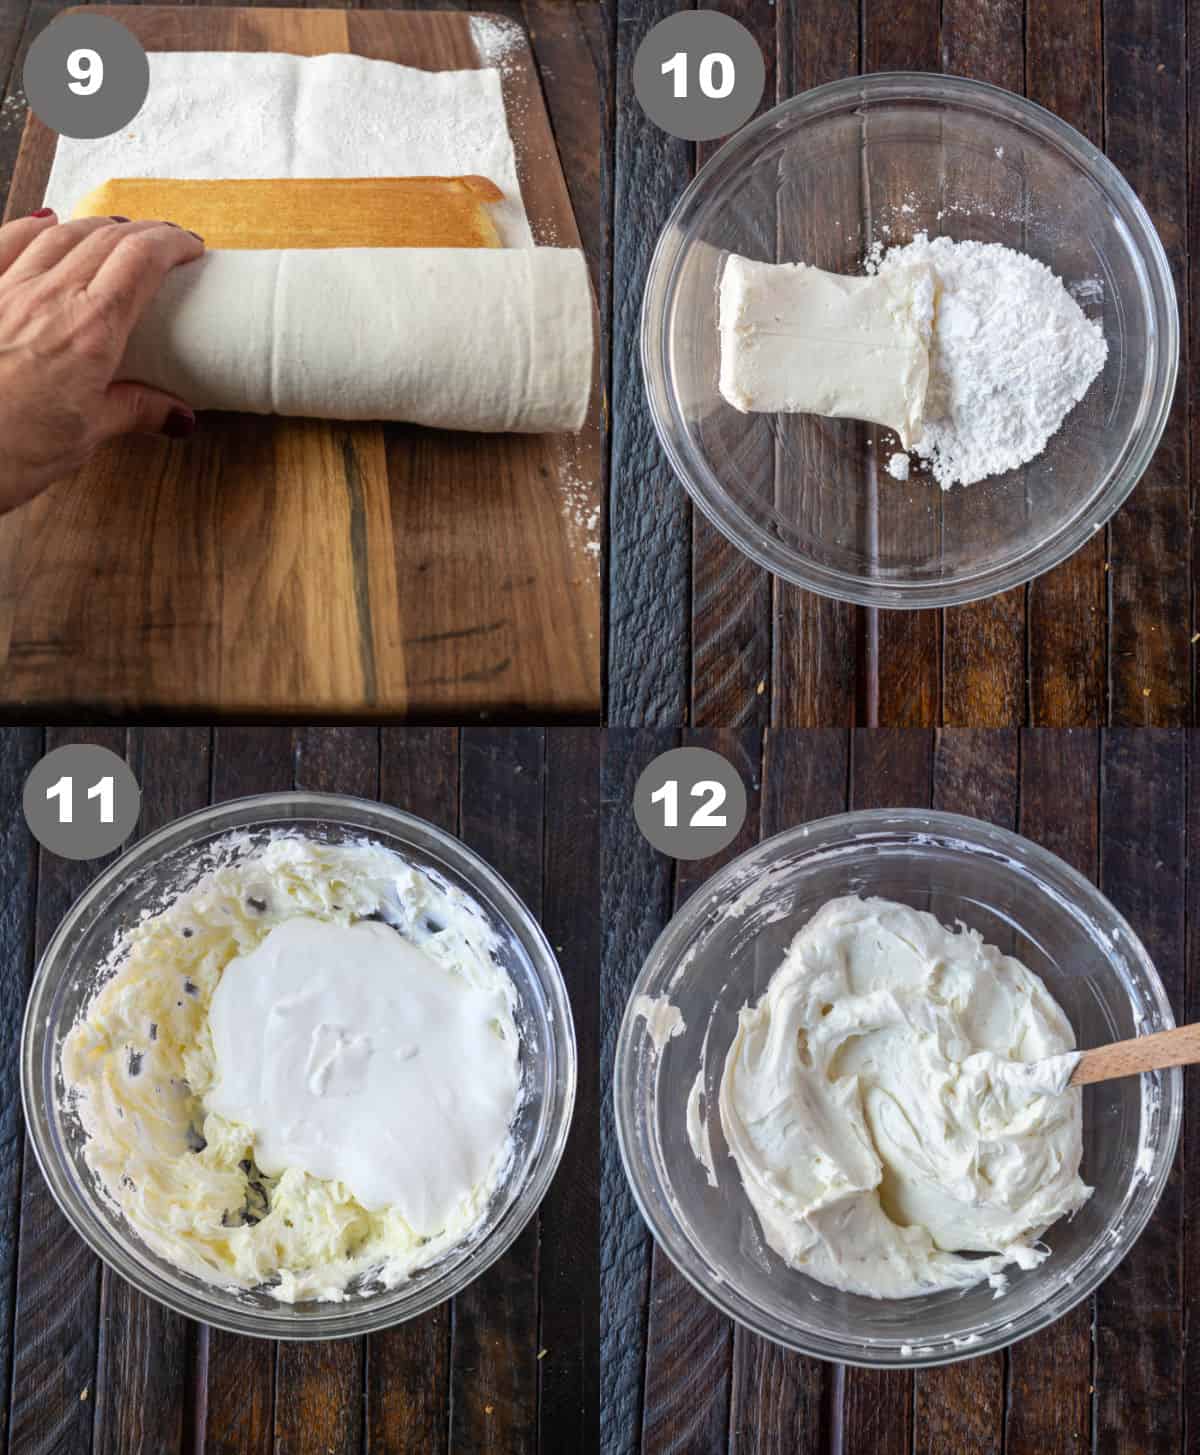 The baked cake placed on the towel and rolled up. In a bowl the cream cheese filling all mixed together.